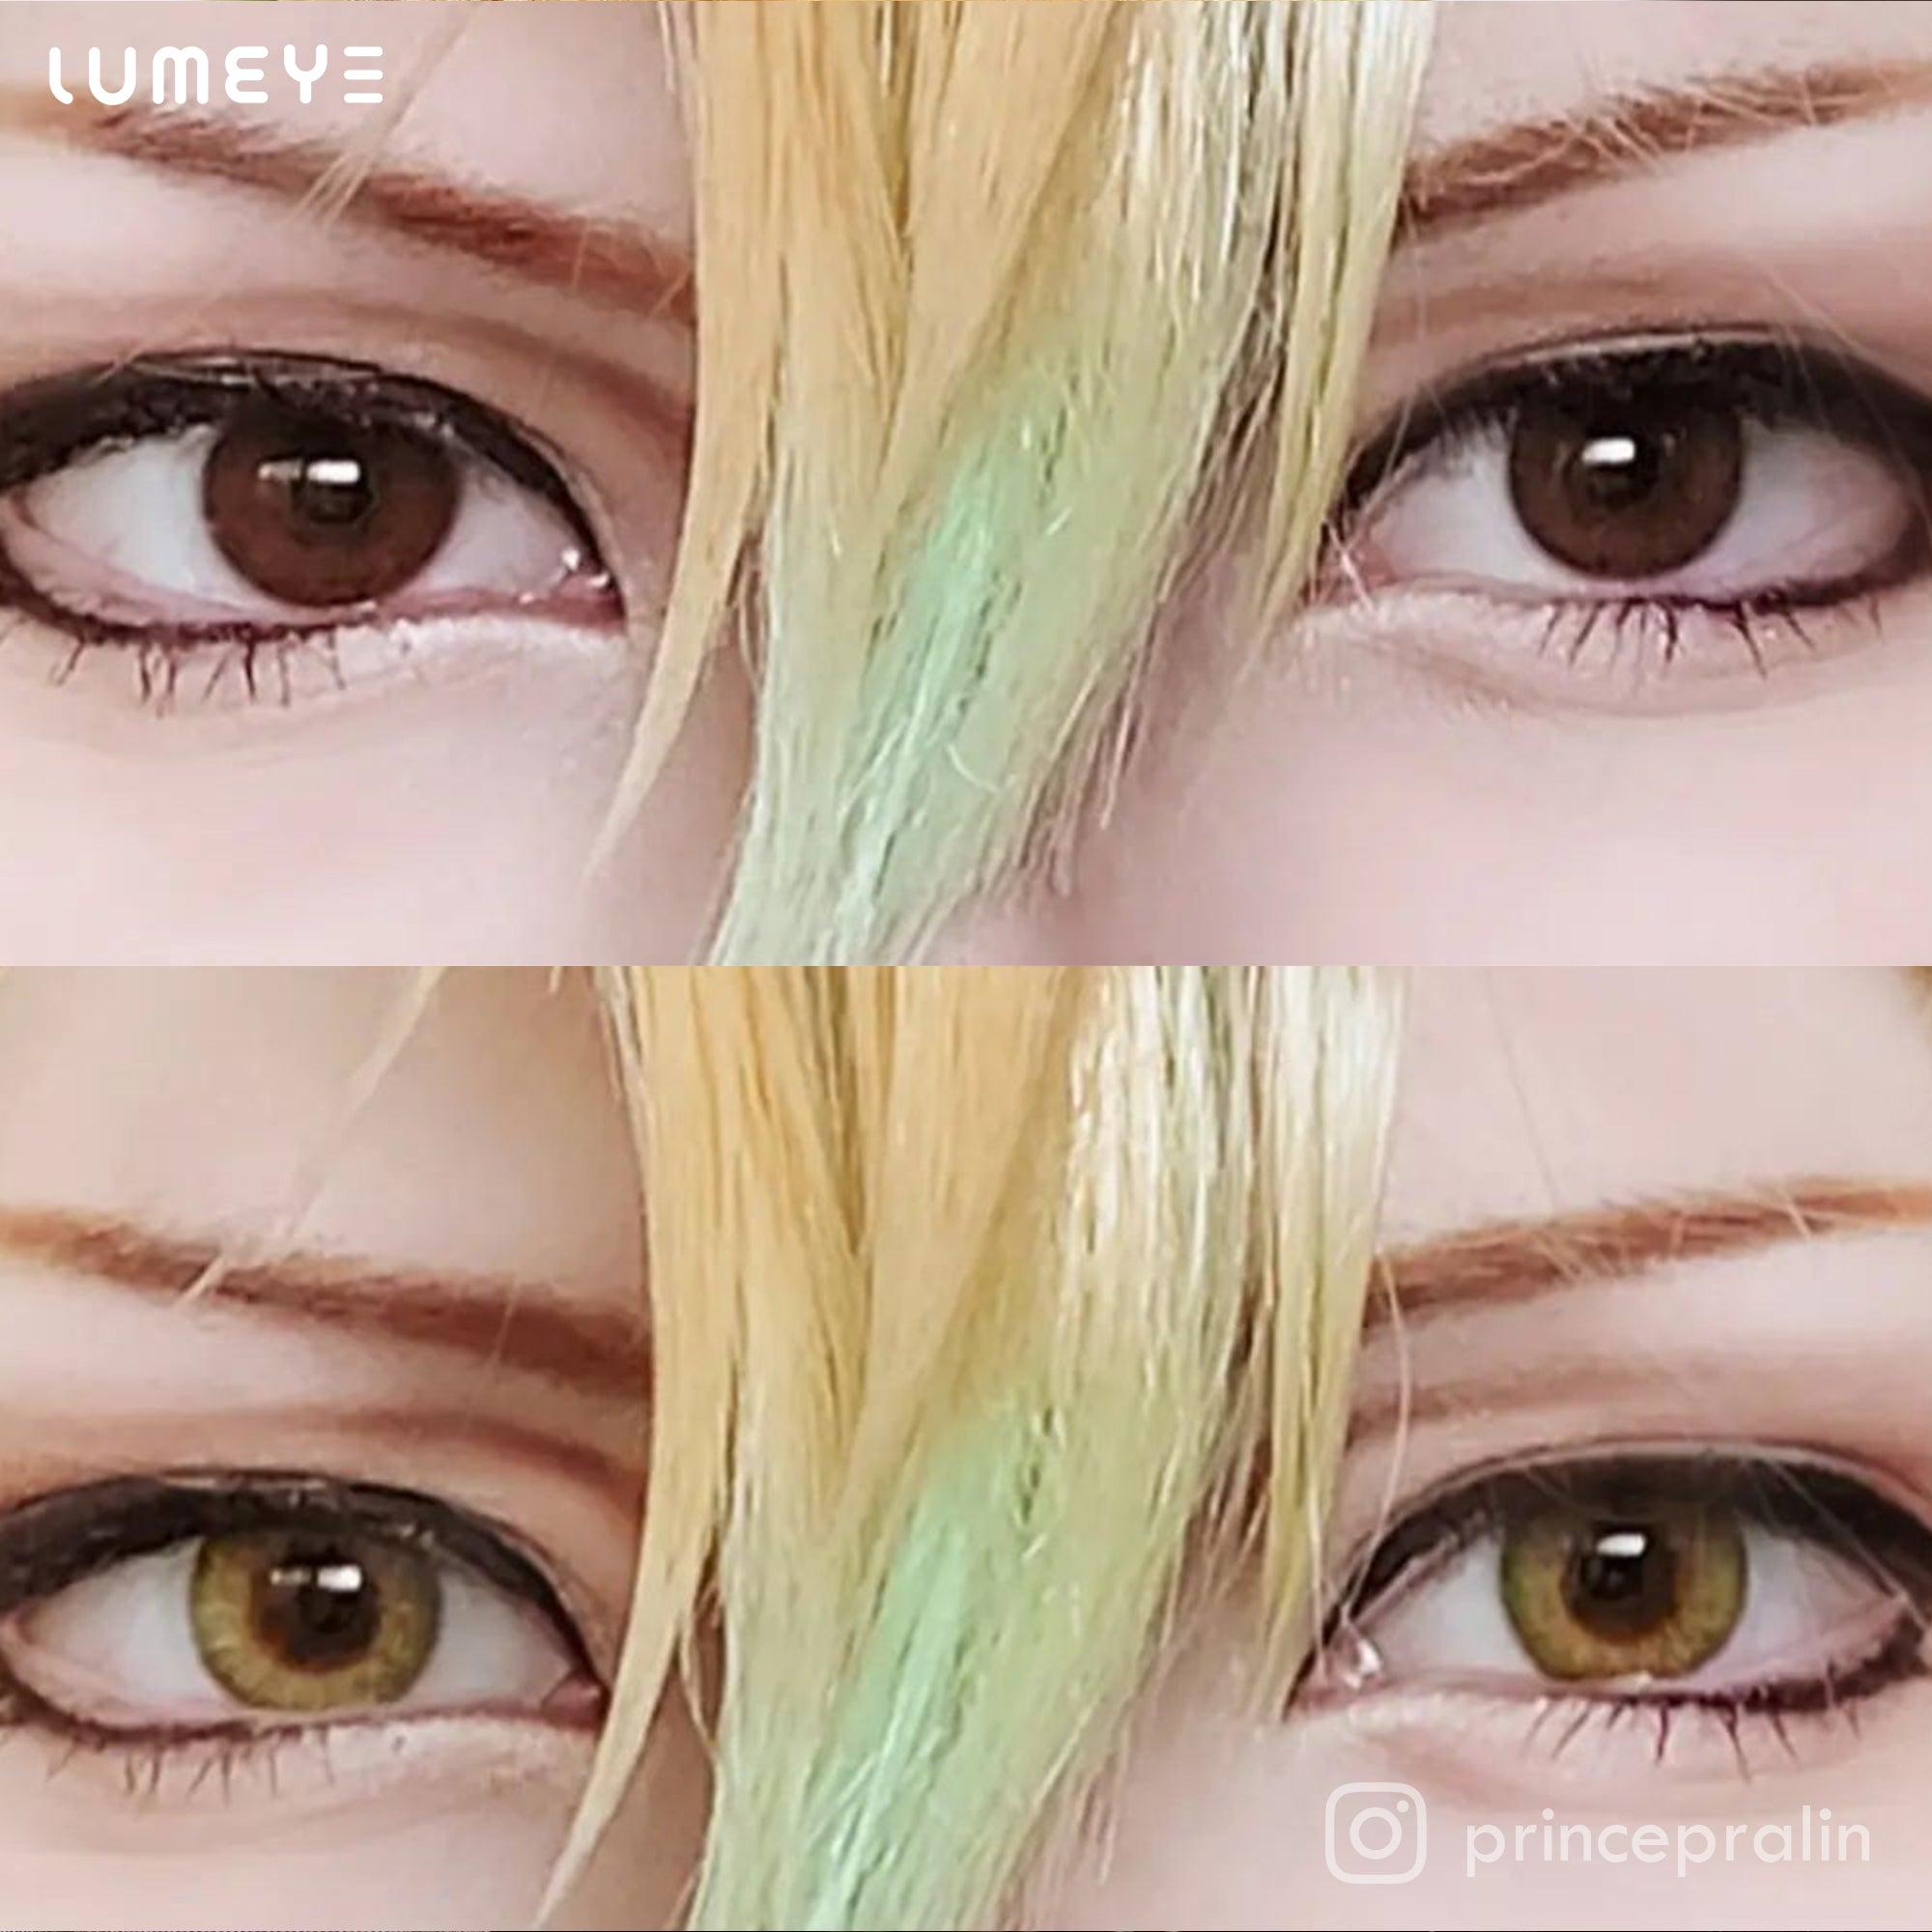 Best COLORED CONTACTS - LUMEYE Real Khaki Colored Contact Lenses - LUMEYE